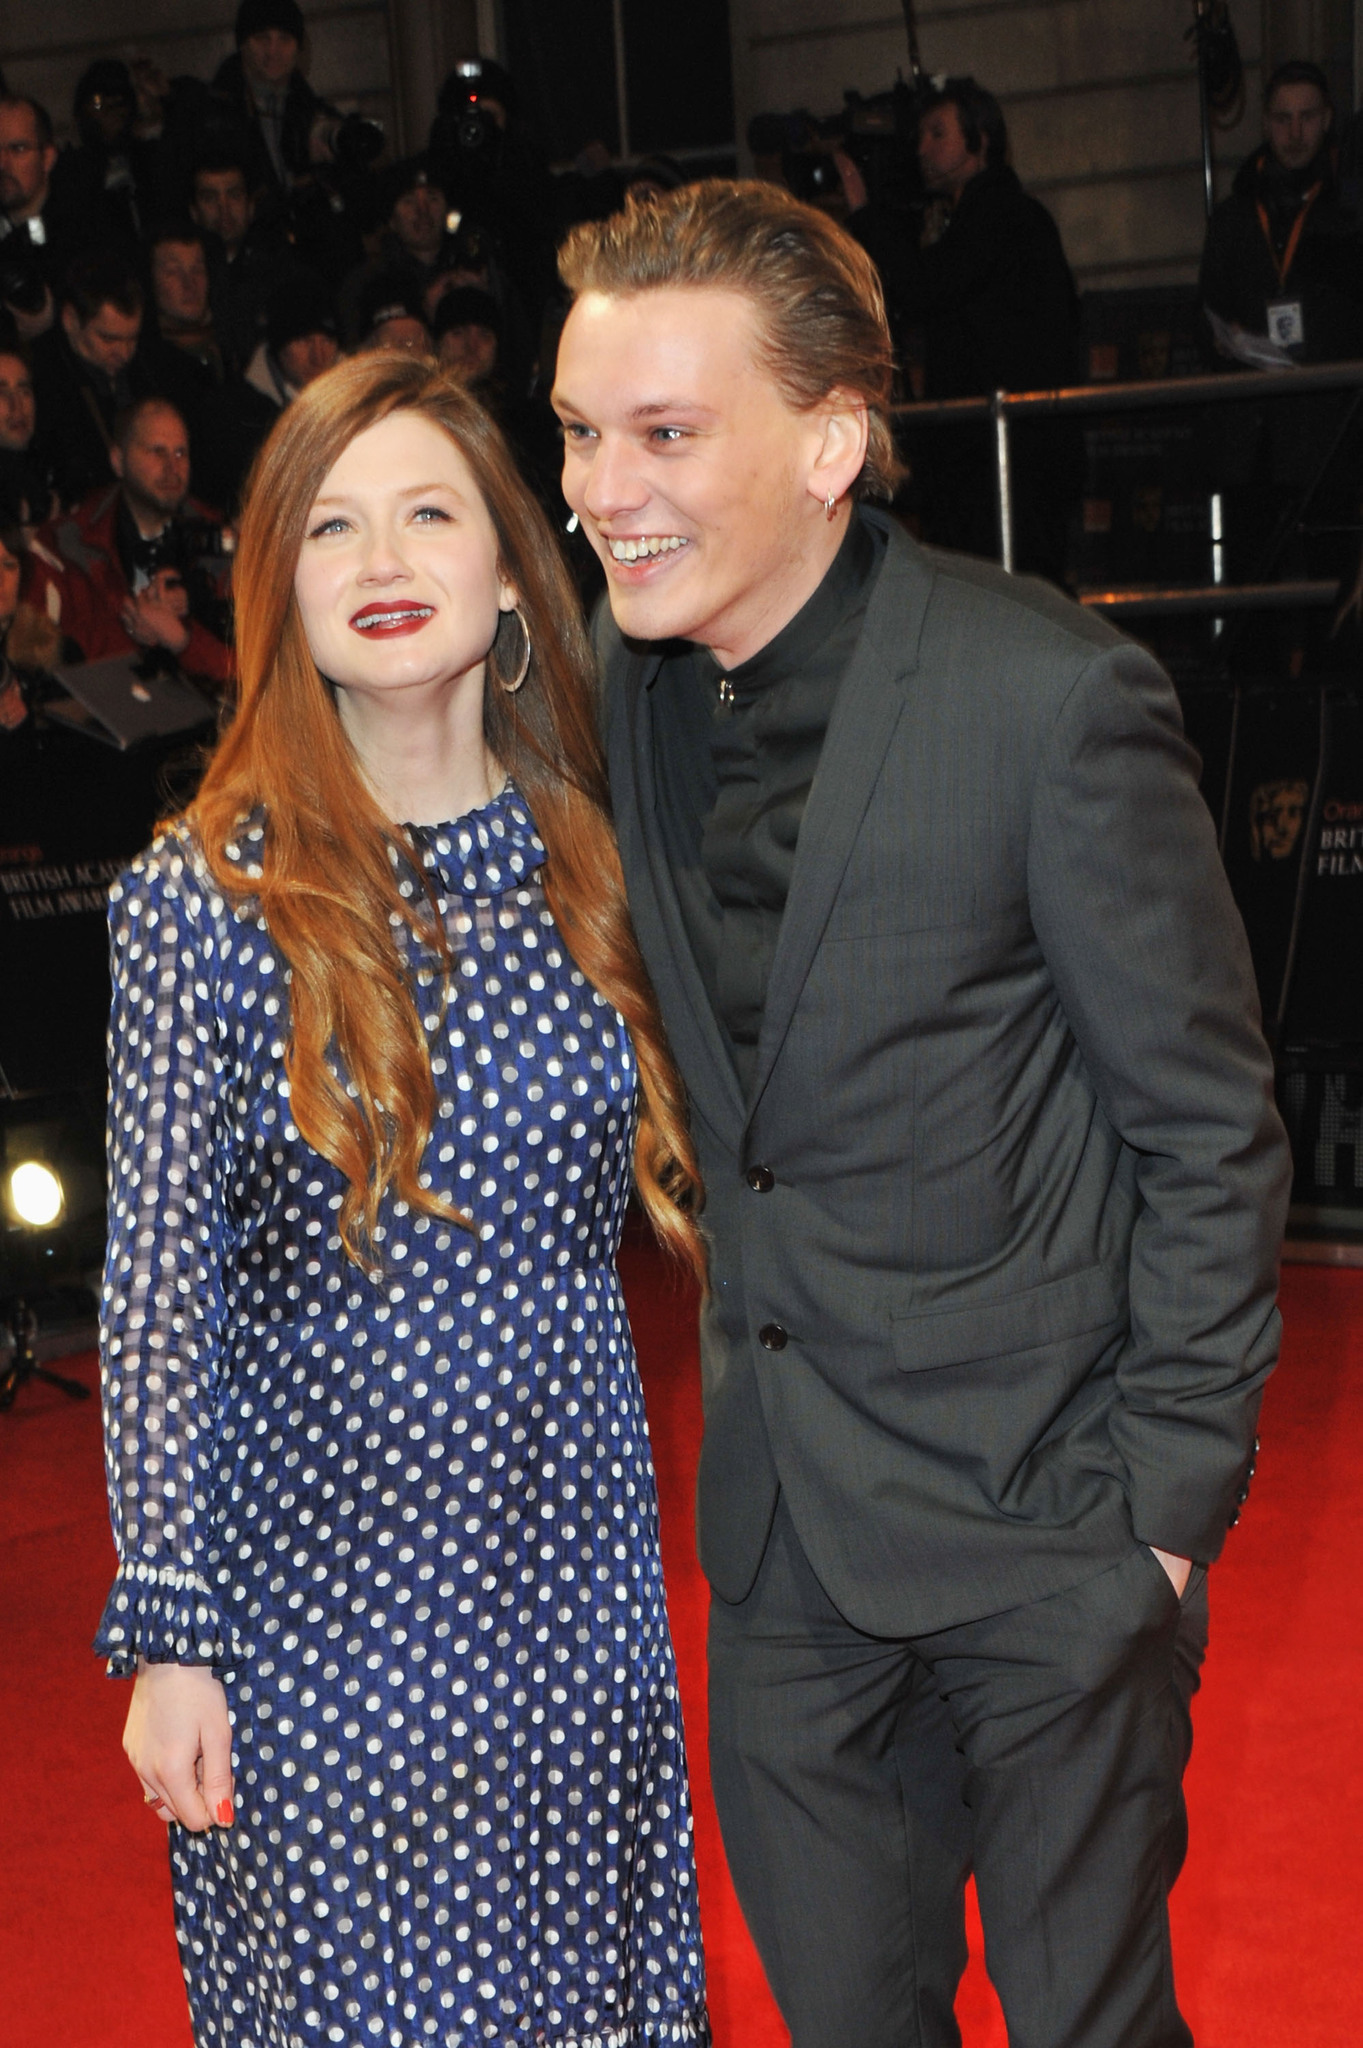 Bonnie Wright and Jamie Campbell Bower